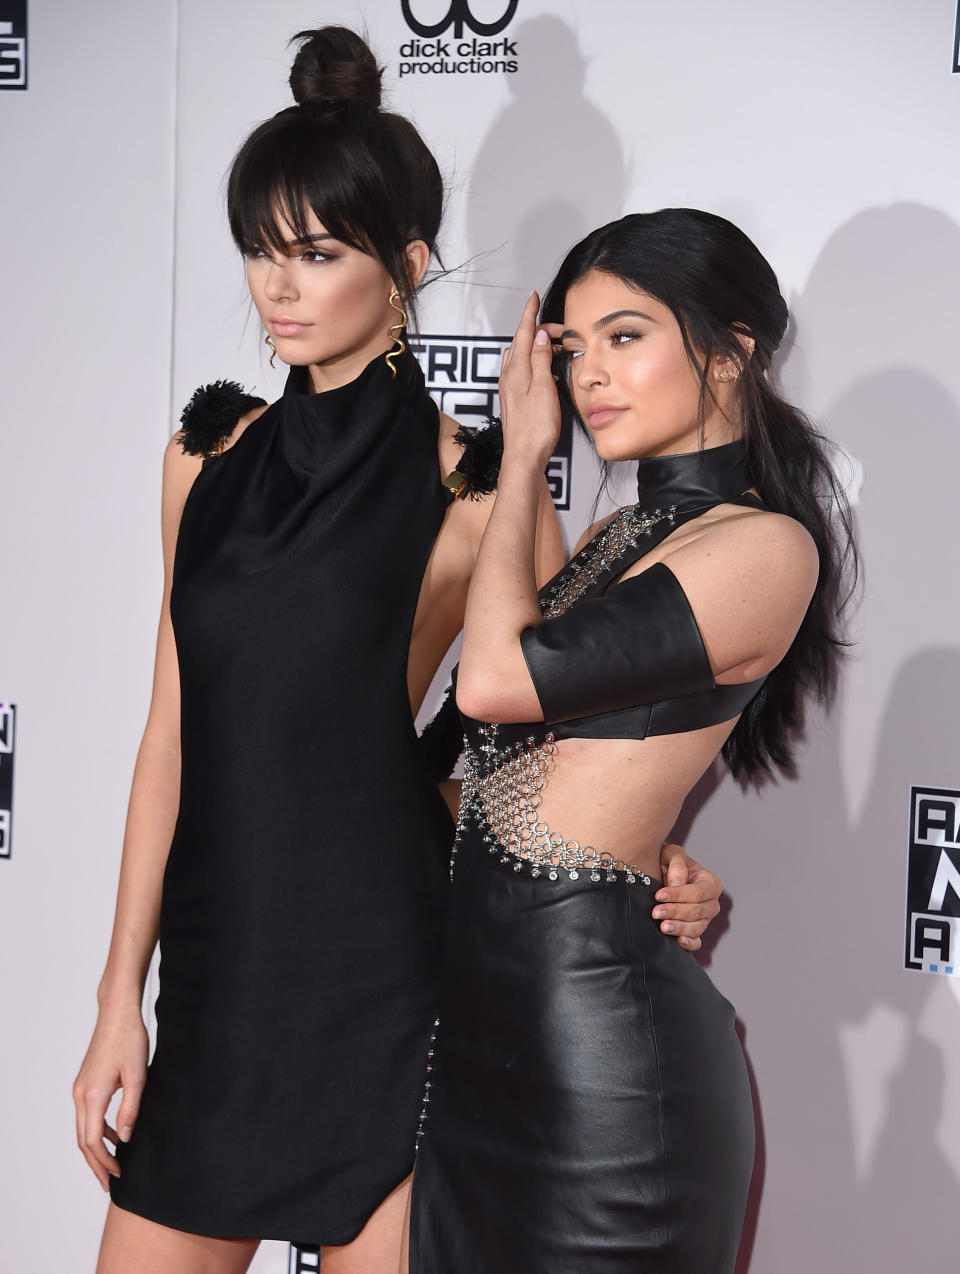 LOS ANGELES, CA - NOVEMBER 22:  Kendall Jenner and Kylie Jenner arrives at the 2015 American Music Awards at Microsoft Theater on November 22, 2015 in Los Angeles, California.  (Photo by Steve Granitz/WireImage)